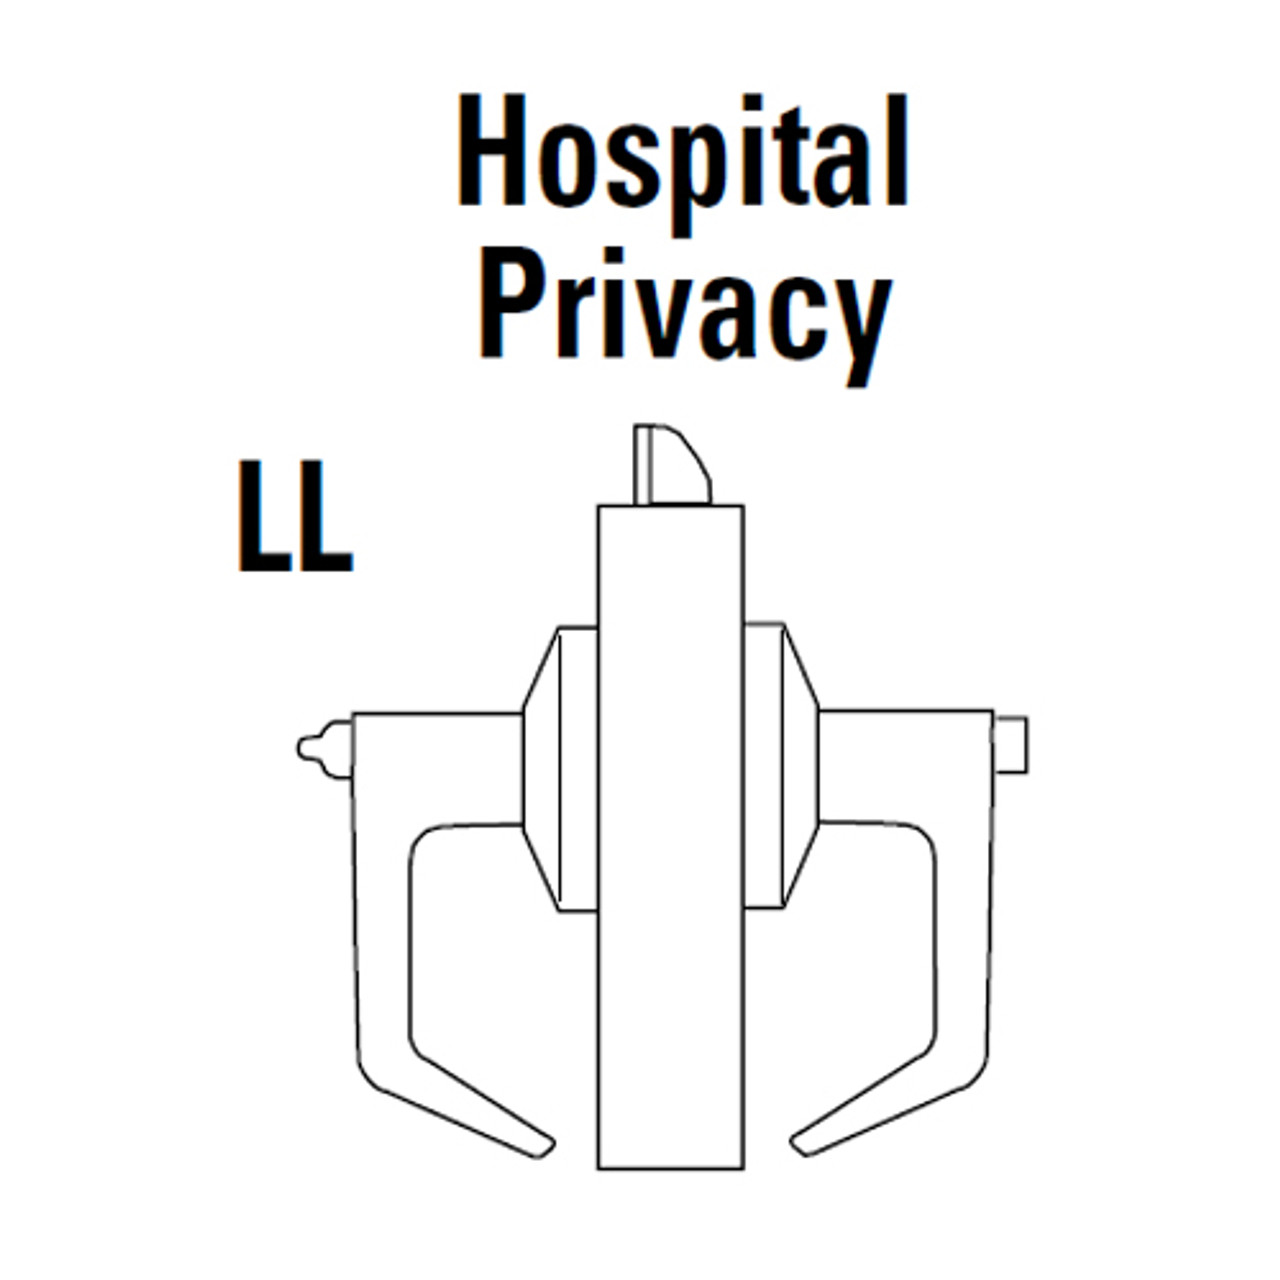 9K30LL16LS3618 Best 9K Series Hospital Privacy Heavy Duty Cylindrical Lever Locks with Curved Without Return Lever Design in Bright Nickel